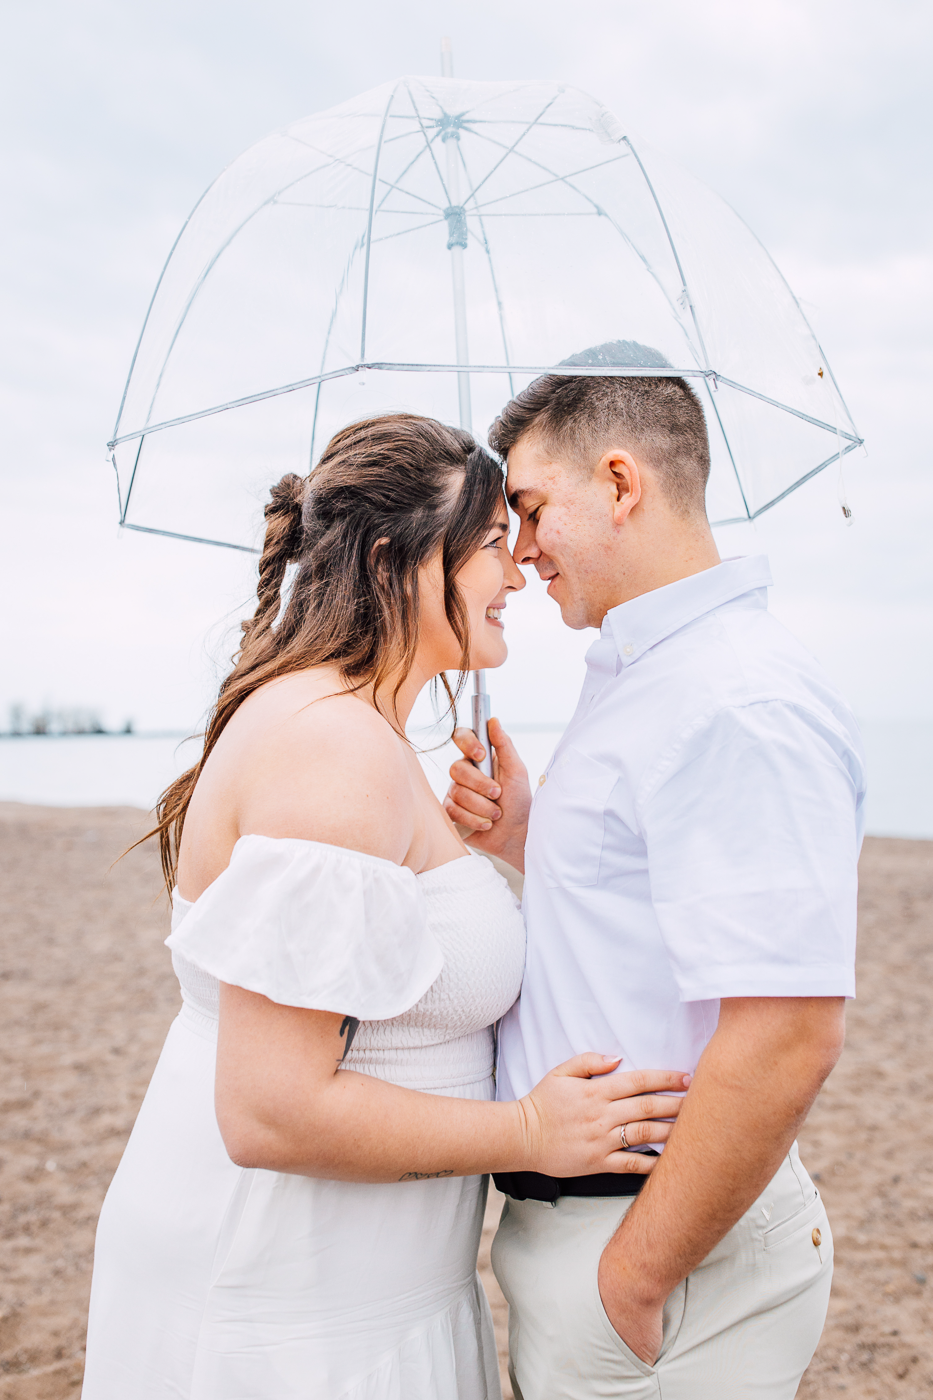  rainy photoshoot on a lake ontario beach in central NY. Engaged couple cuddles up under an umbrella on a cloudy day on a the beach. 